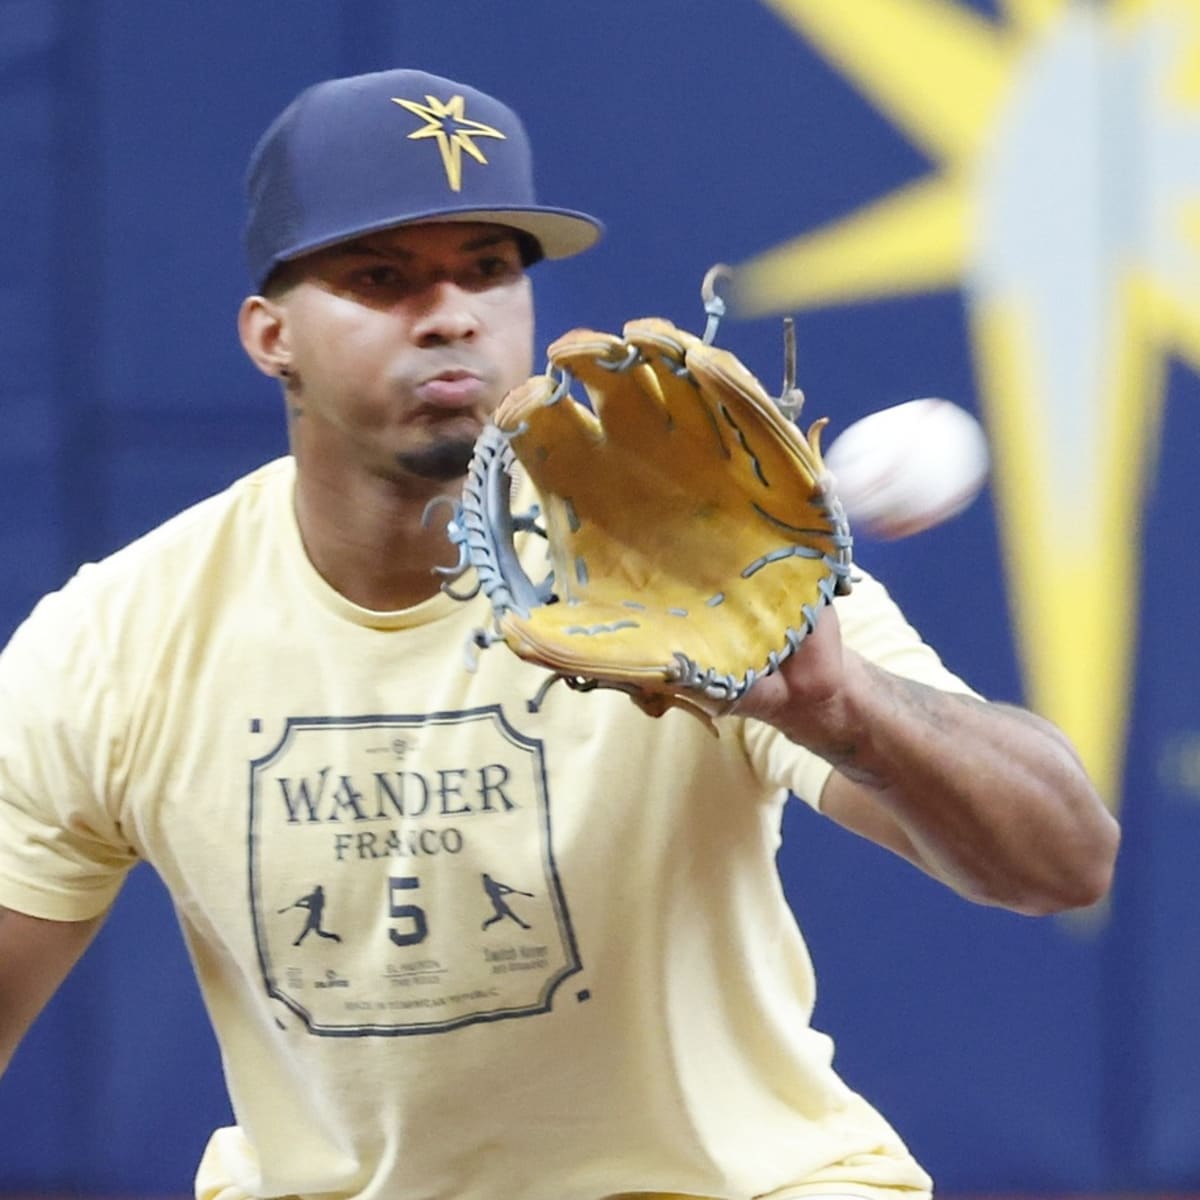 Wander Franco Not Traveling With Team As MLB, Tampa Bay Rays Investigating  Online Claims Against The Star Shortstop – OutKick